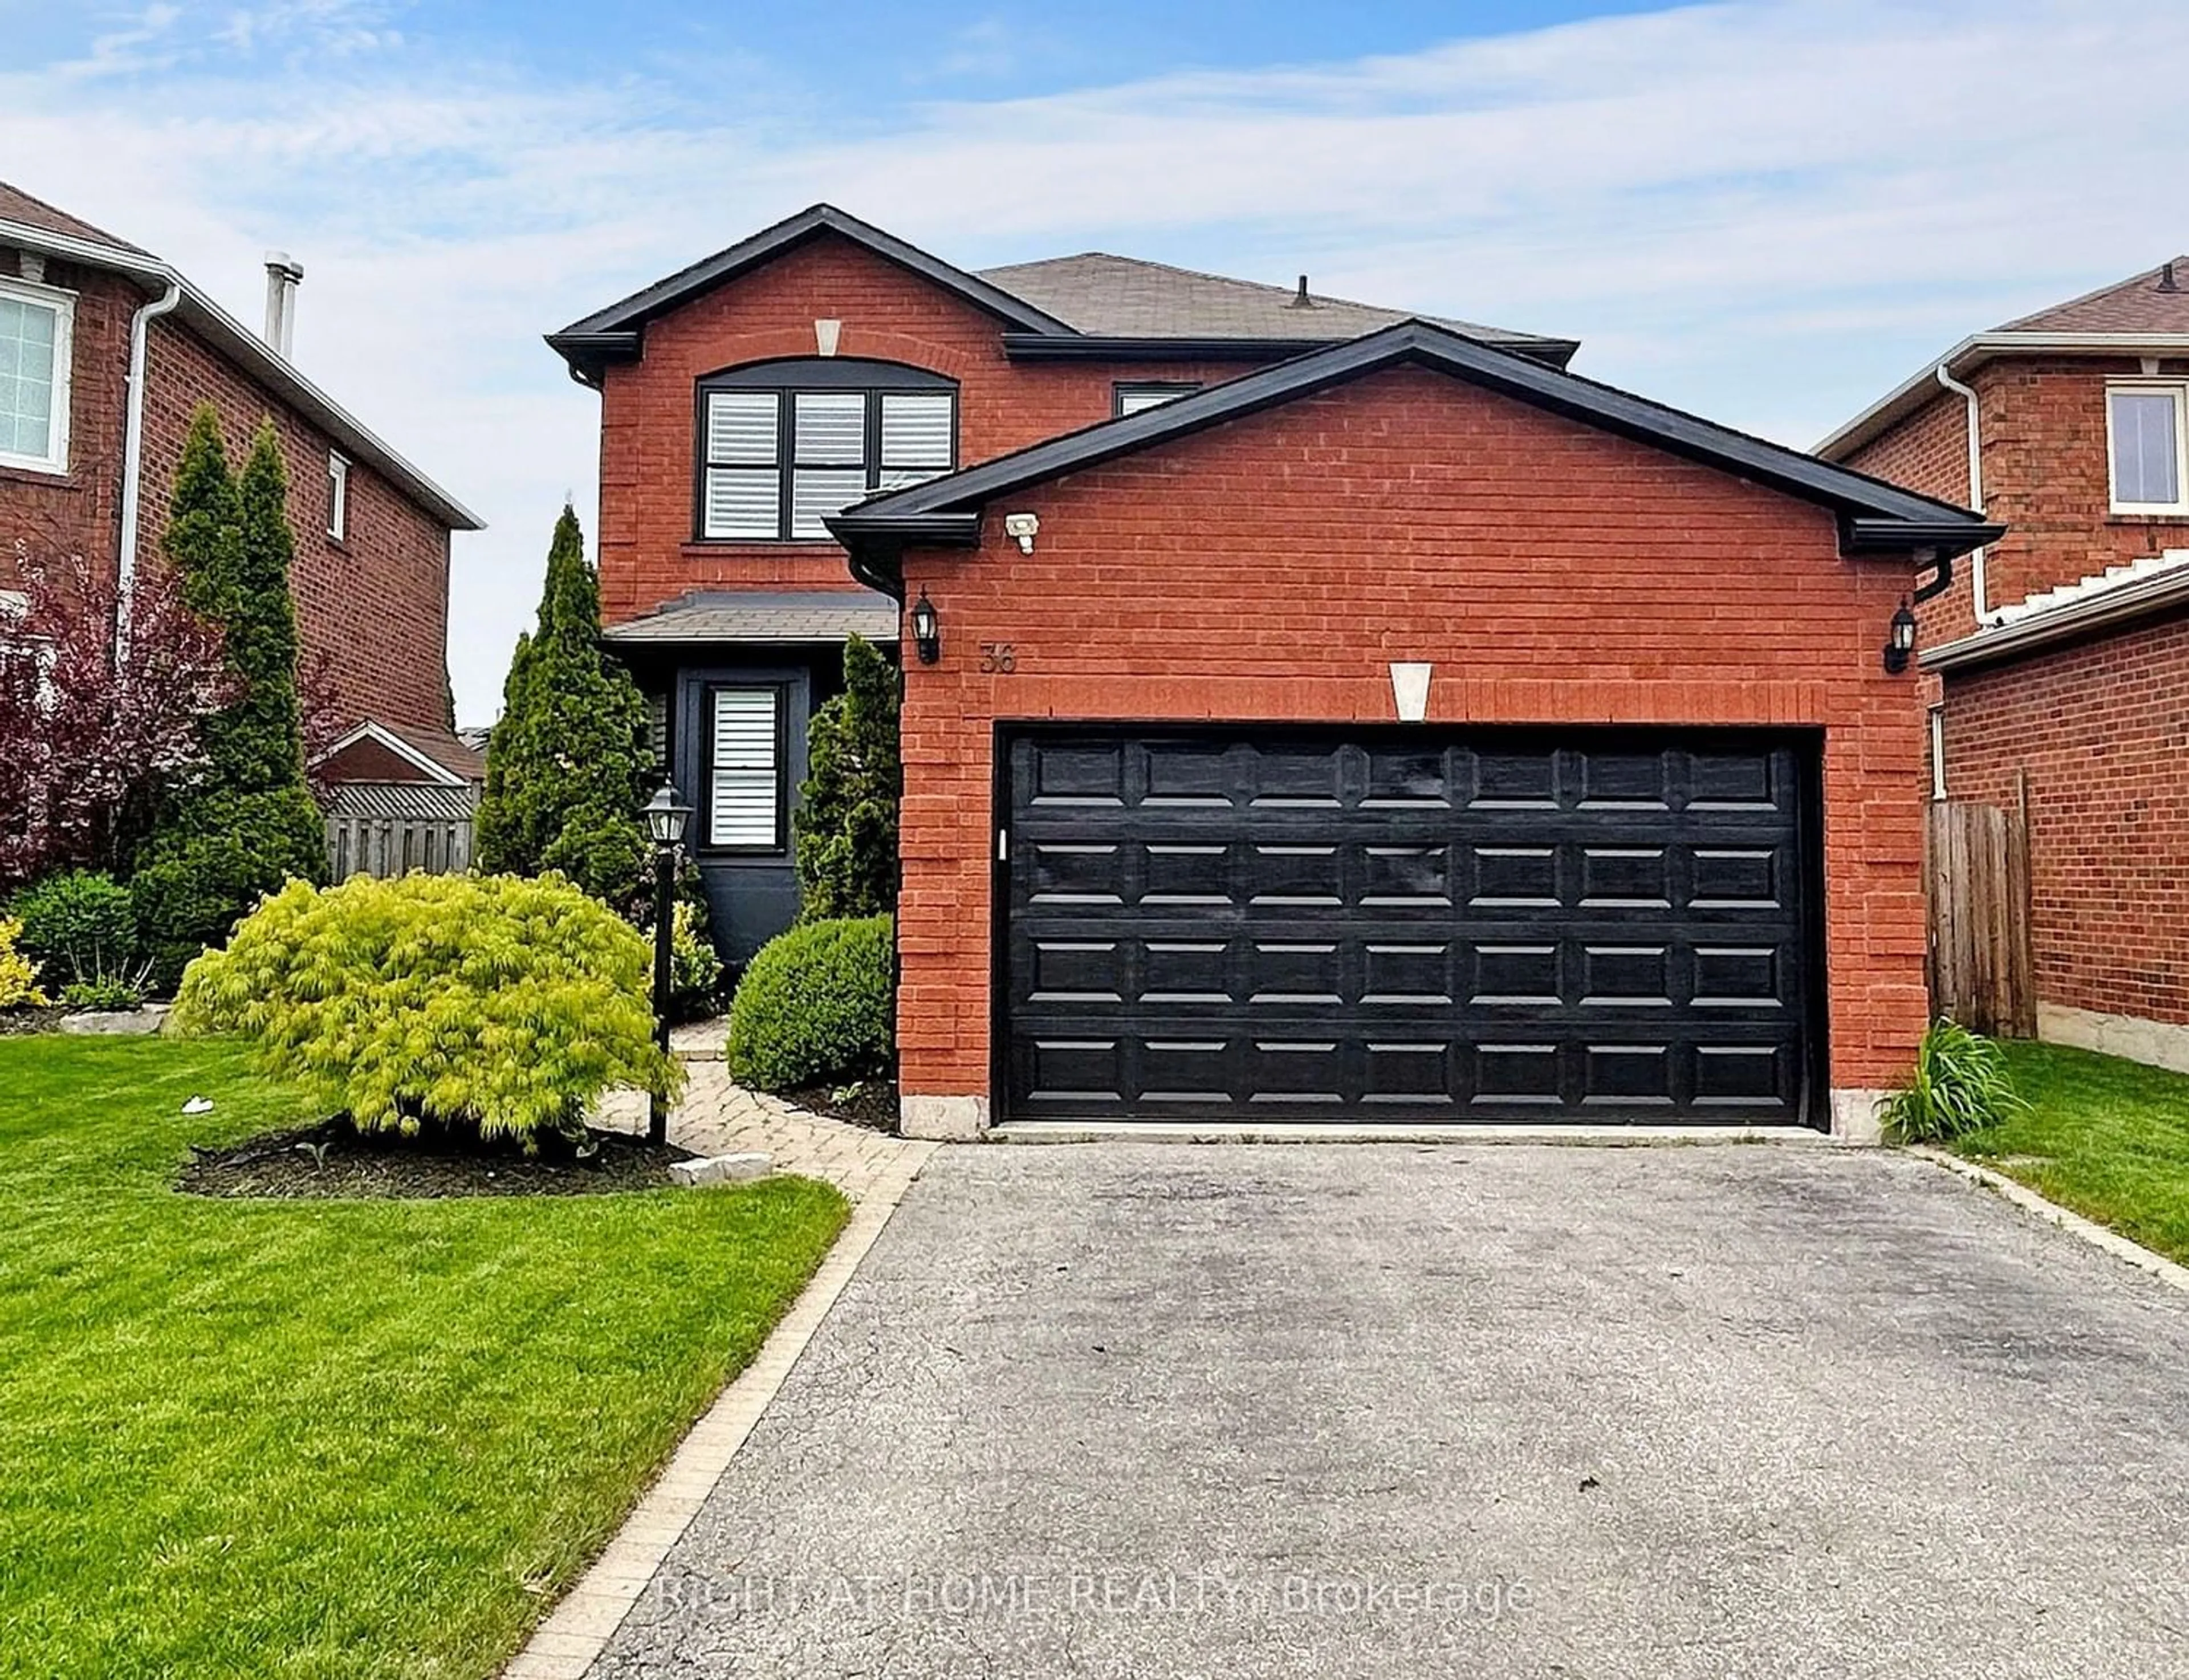 Home with brick exterior material for 36 Fencerow Dr, Whitby Ontario L1R 1Y4